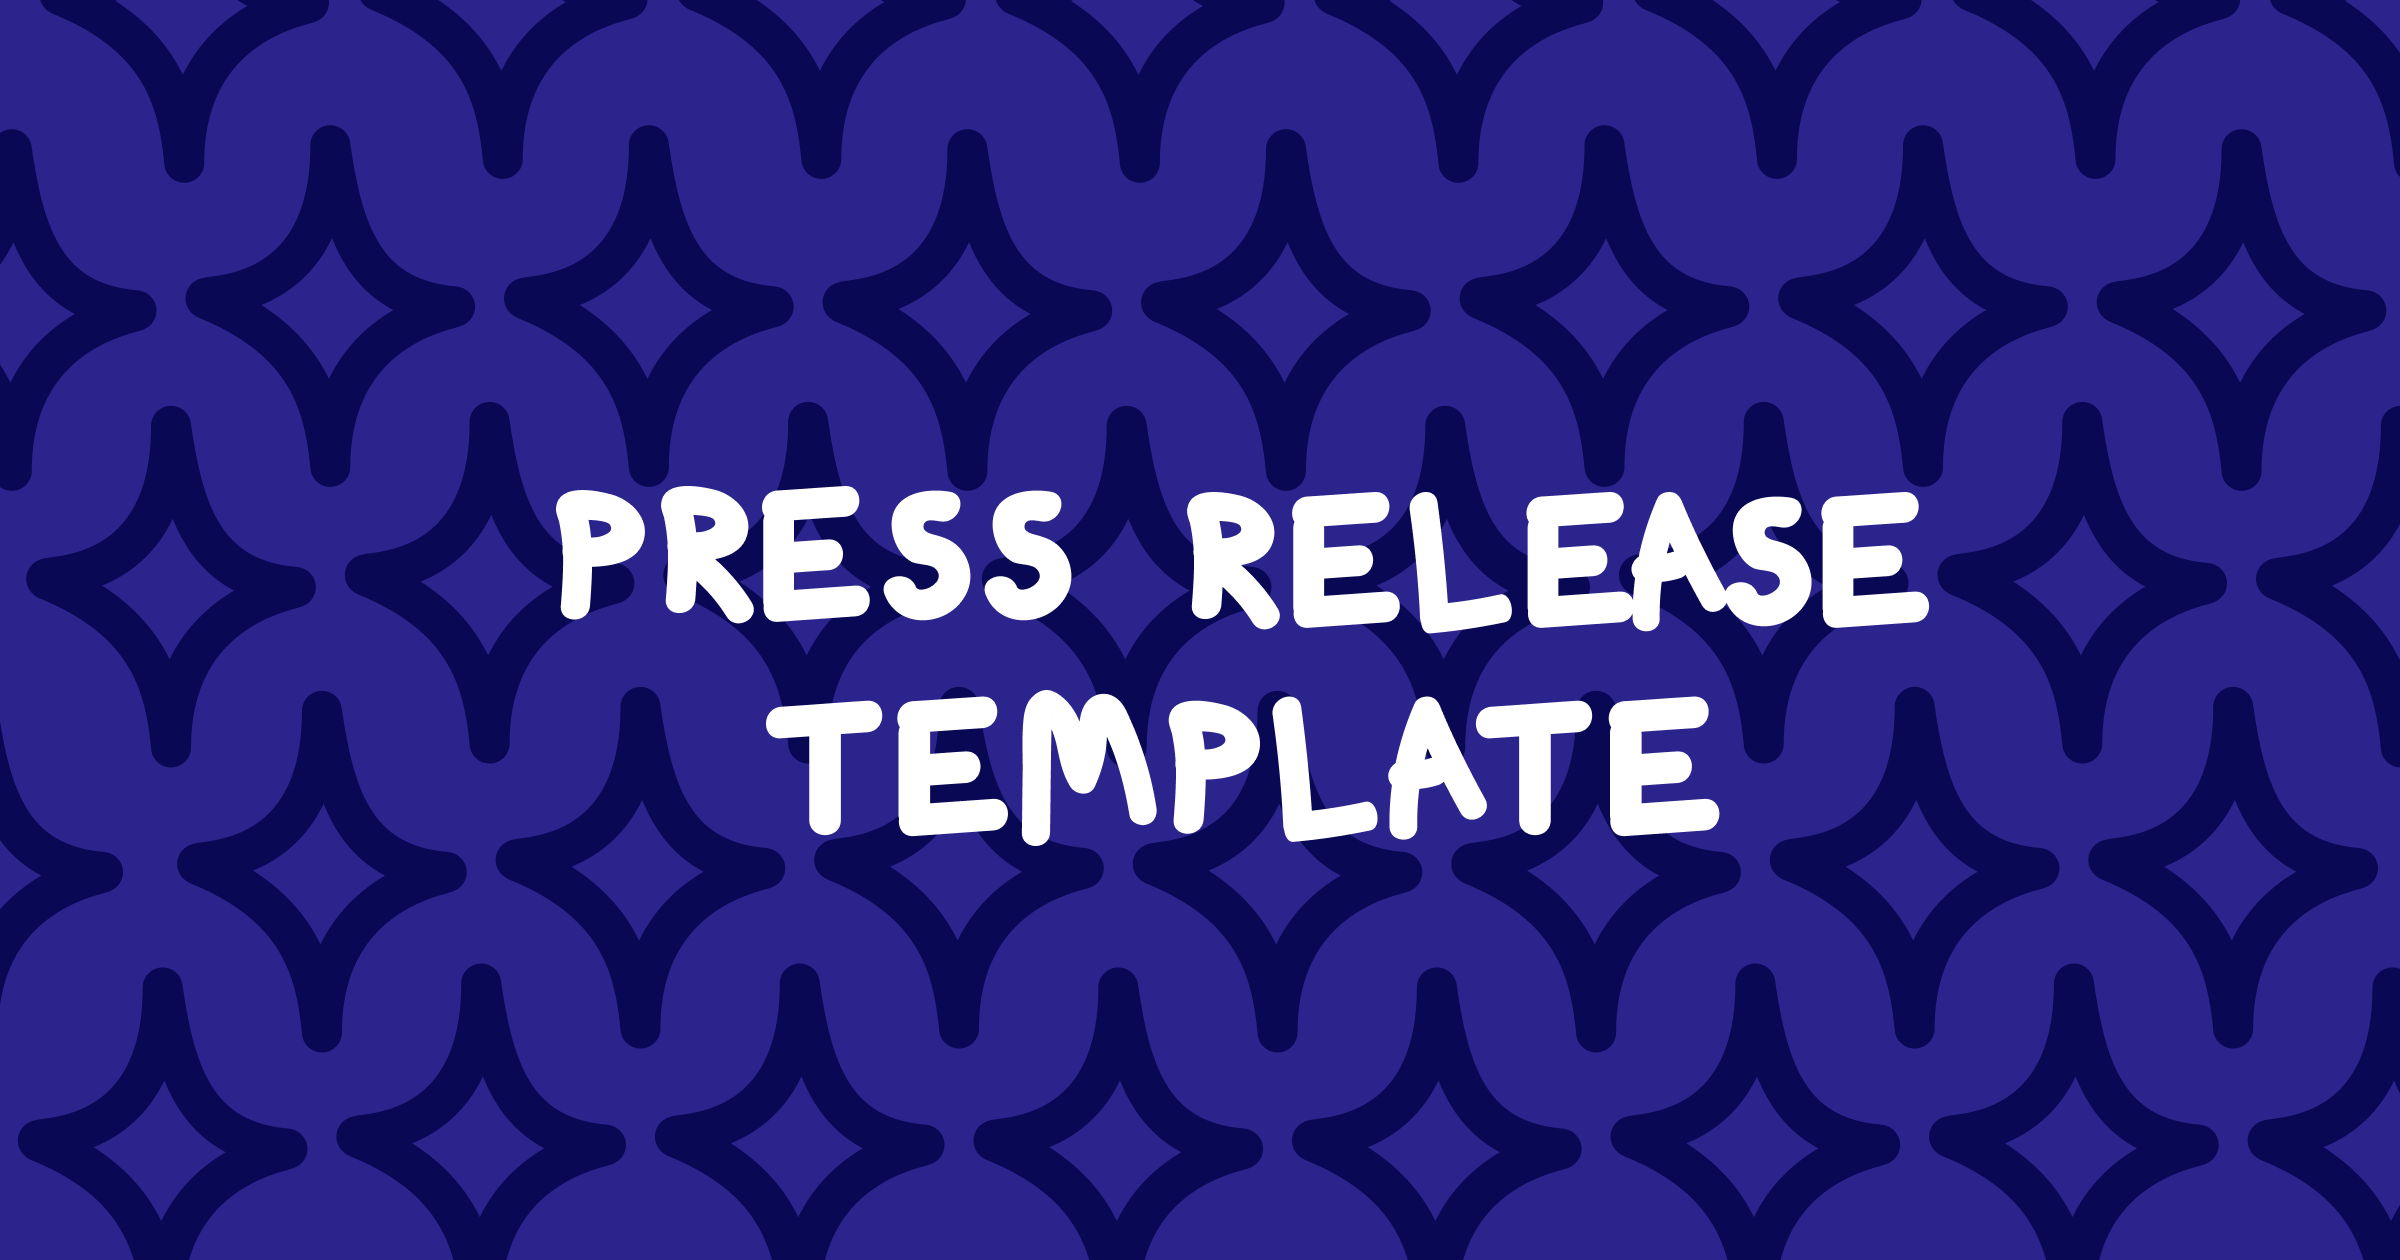 Help: Build a press release using this template (or create your own) 📰